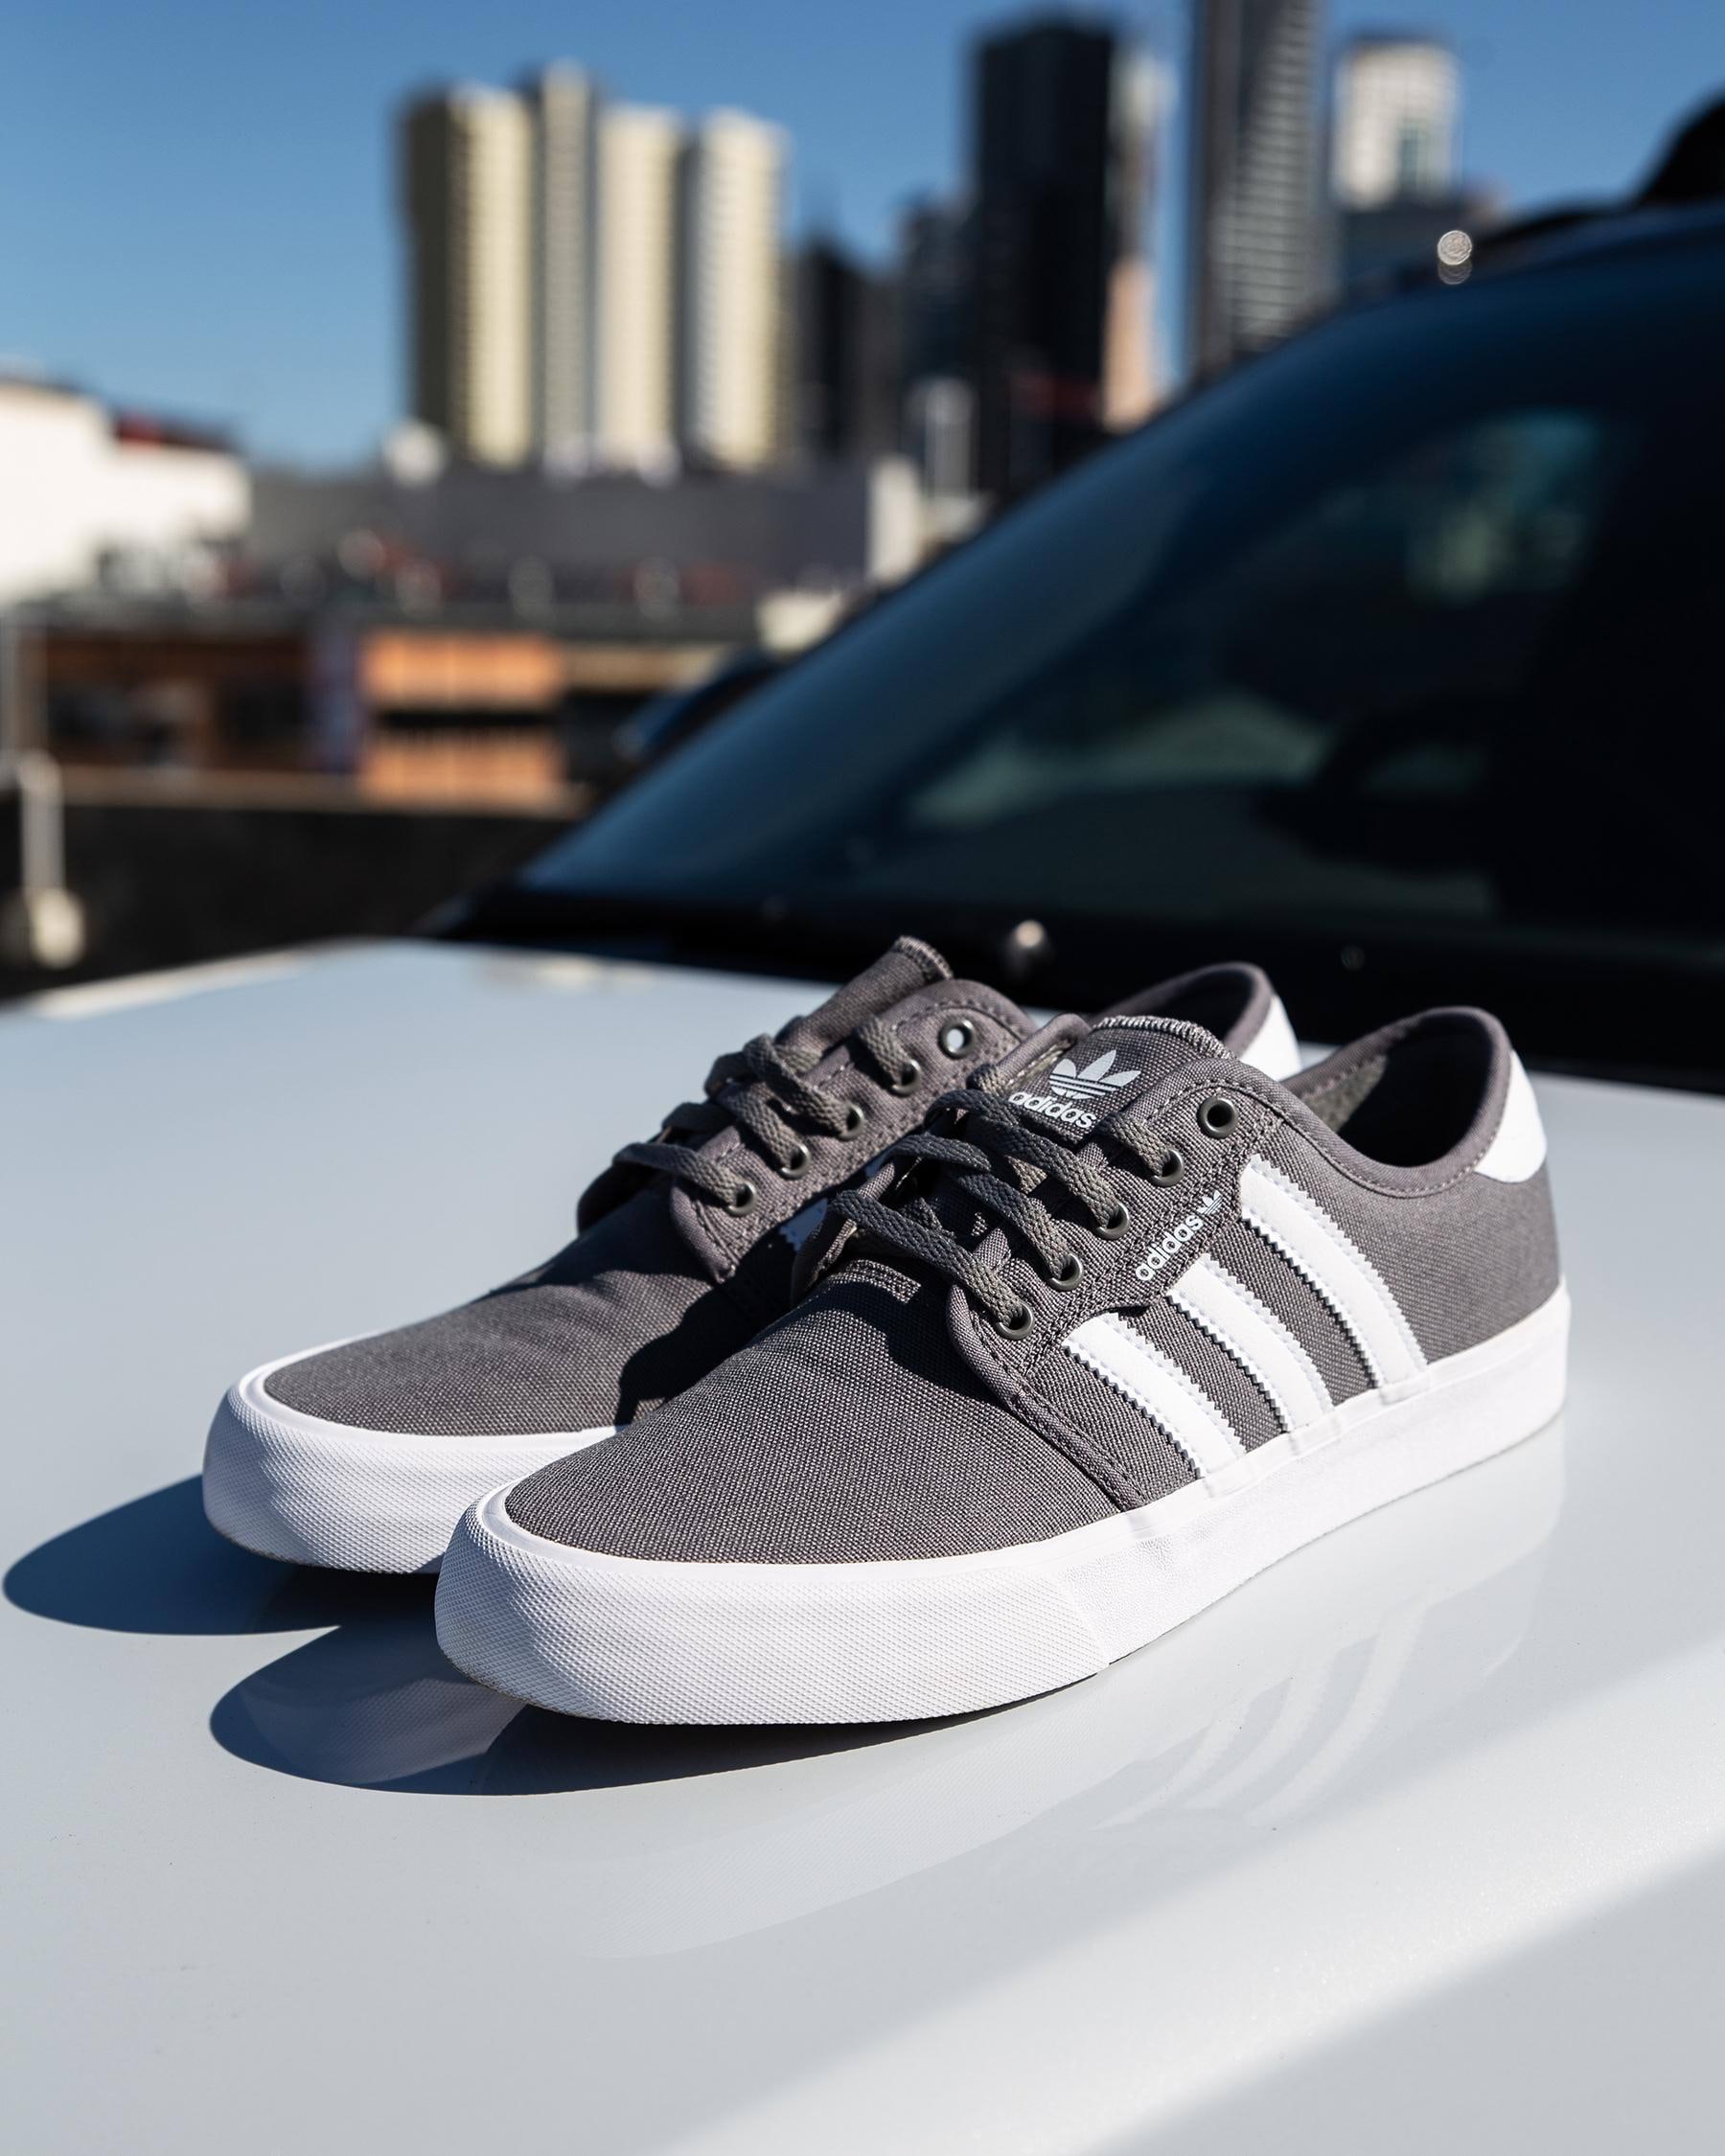 Shoes Beach XT City FREE* Shipping Returns - In Grey/white & States Easy Seeley United Adidas -